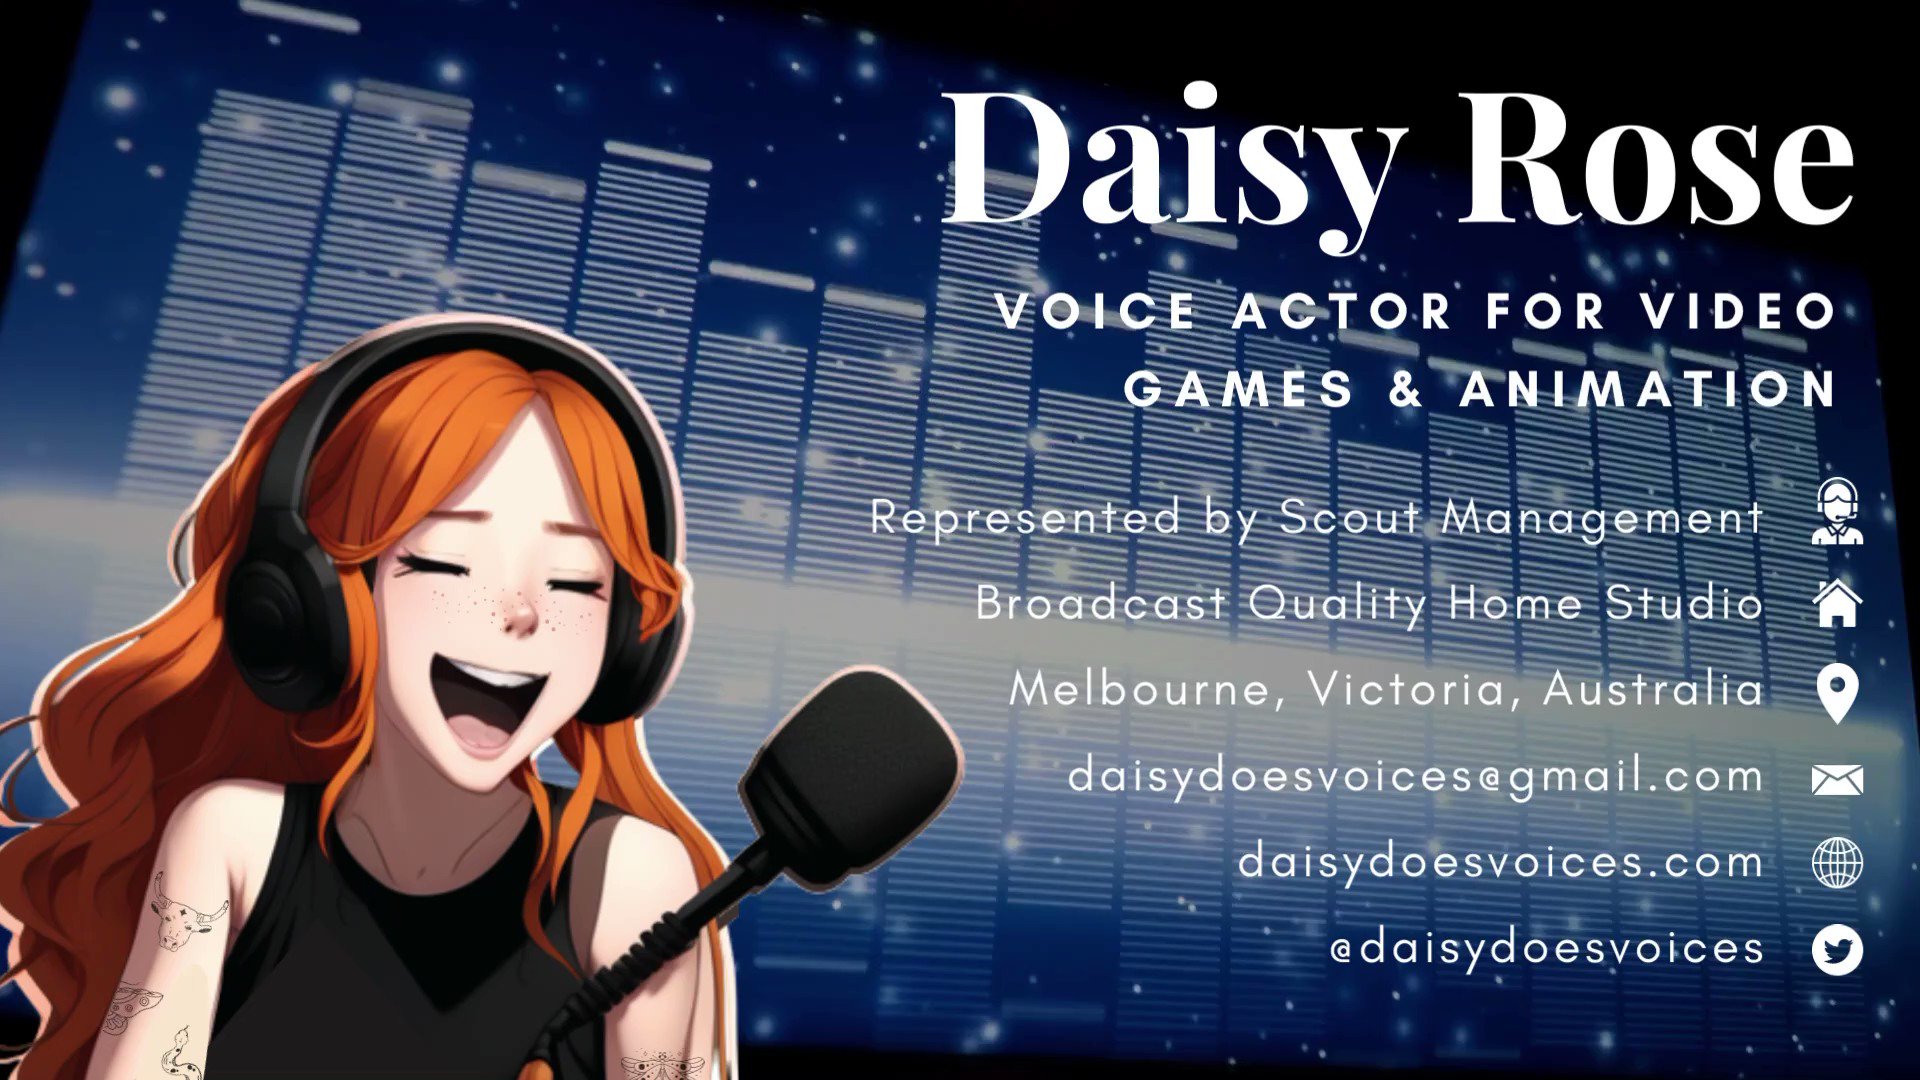 daisy rose voice actor